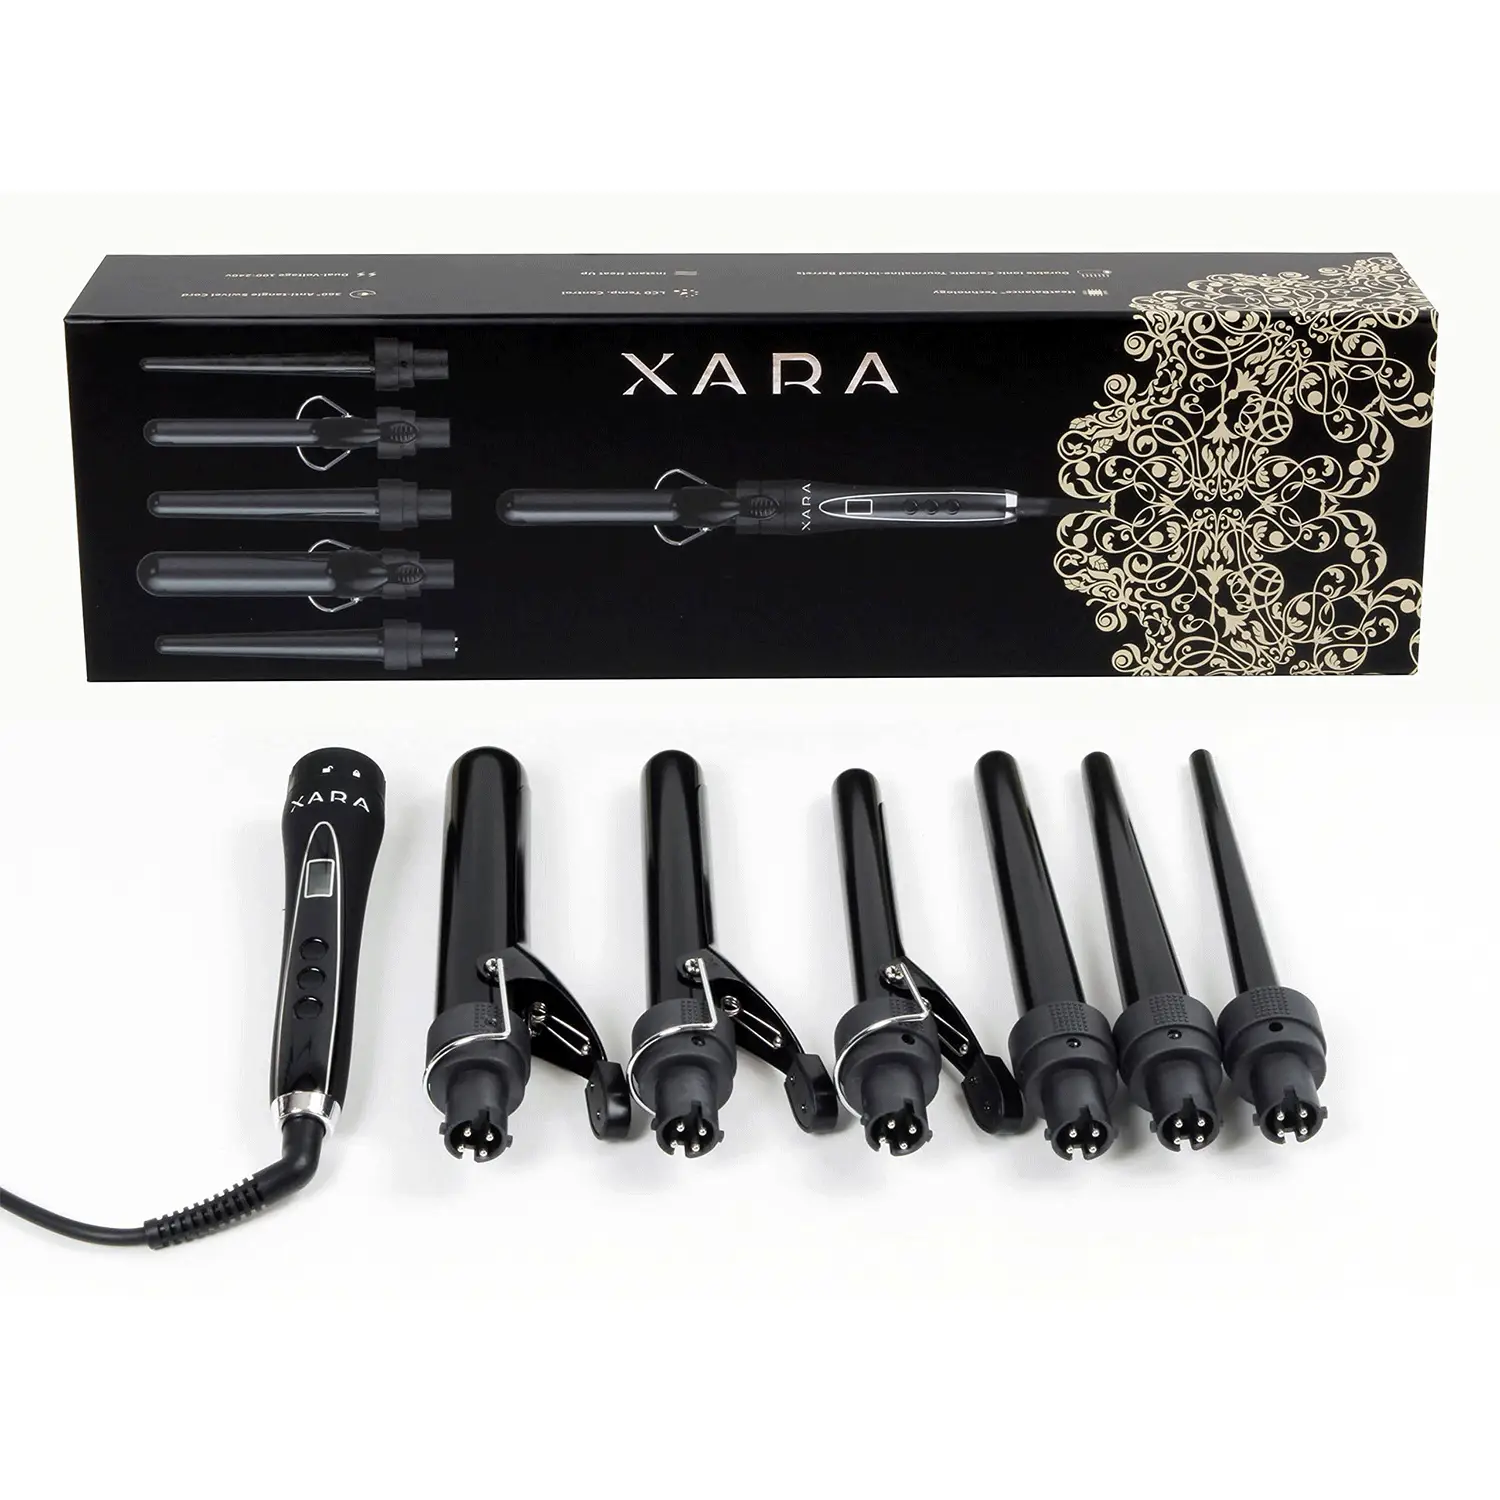 Gel UV Light Nail Dryer and Professional Curling Iron Set